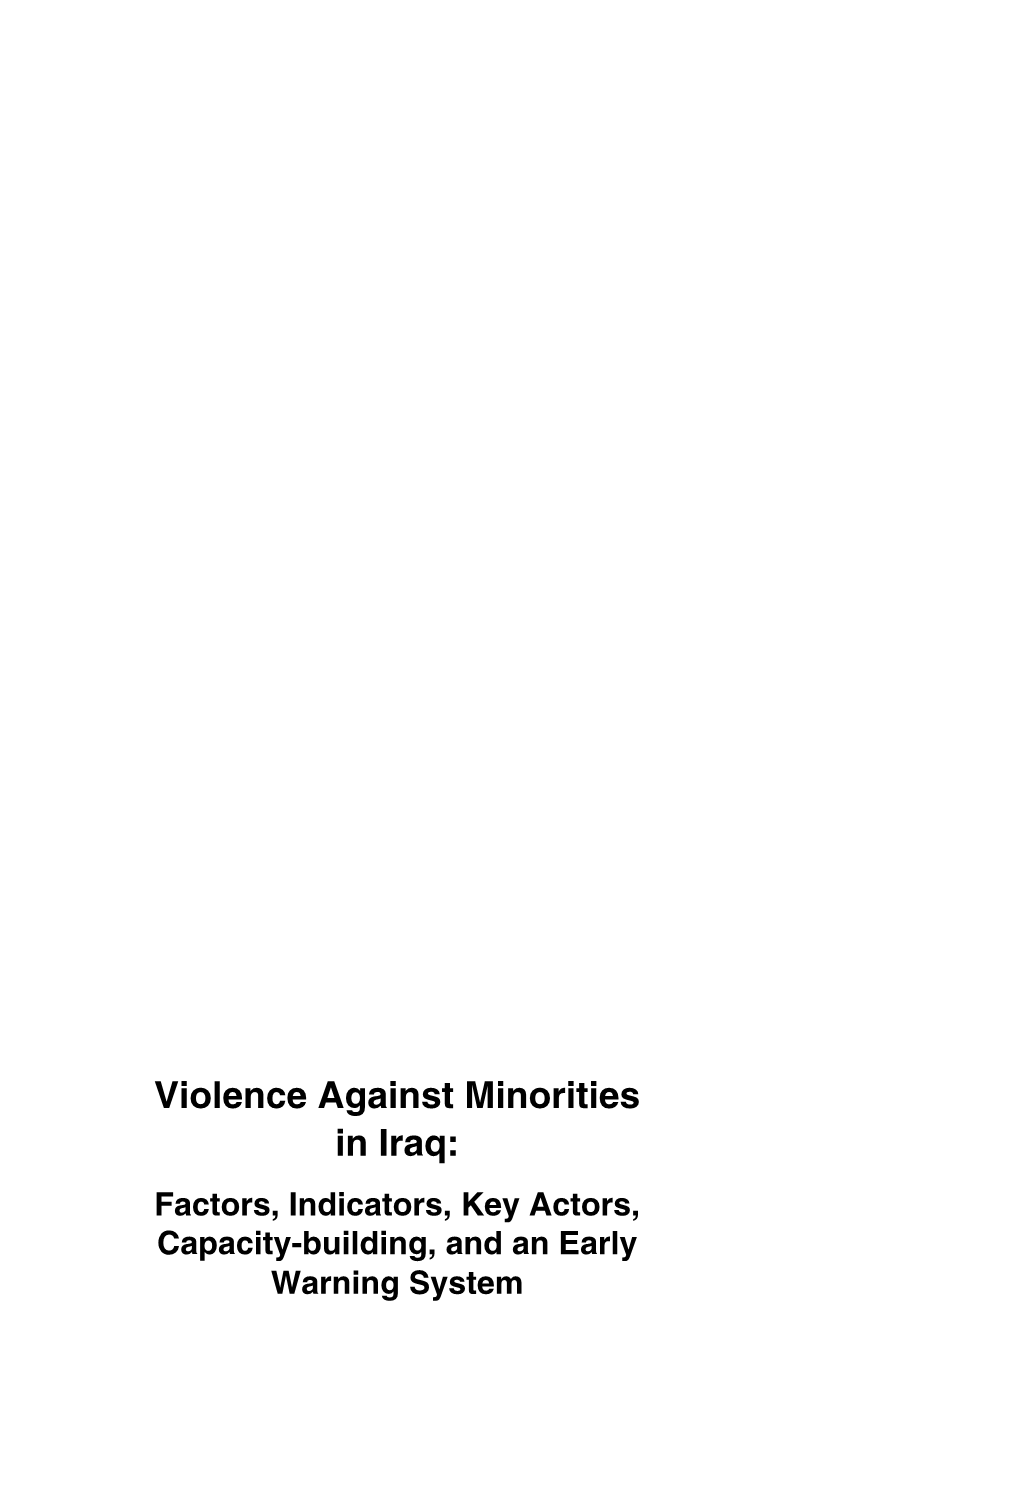 Violence Against Minorities in Iraq: Factors, Indicators, Key Actors, Capacity-Building, and an Early Warning System